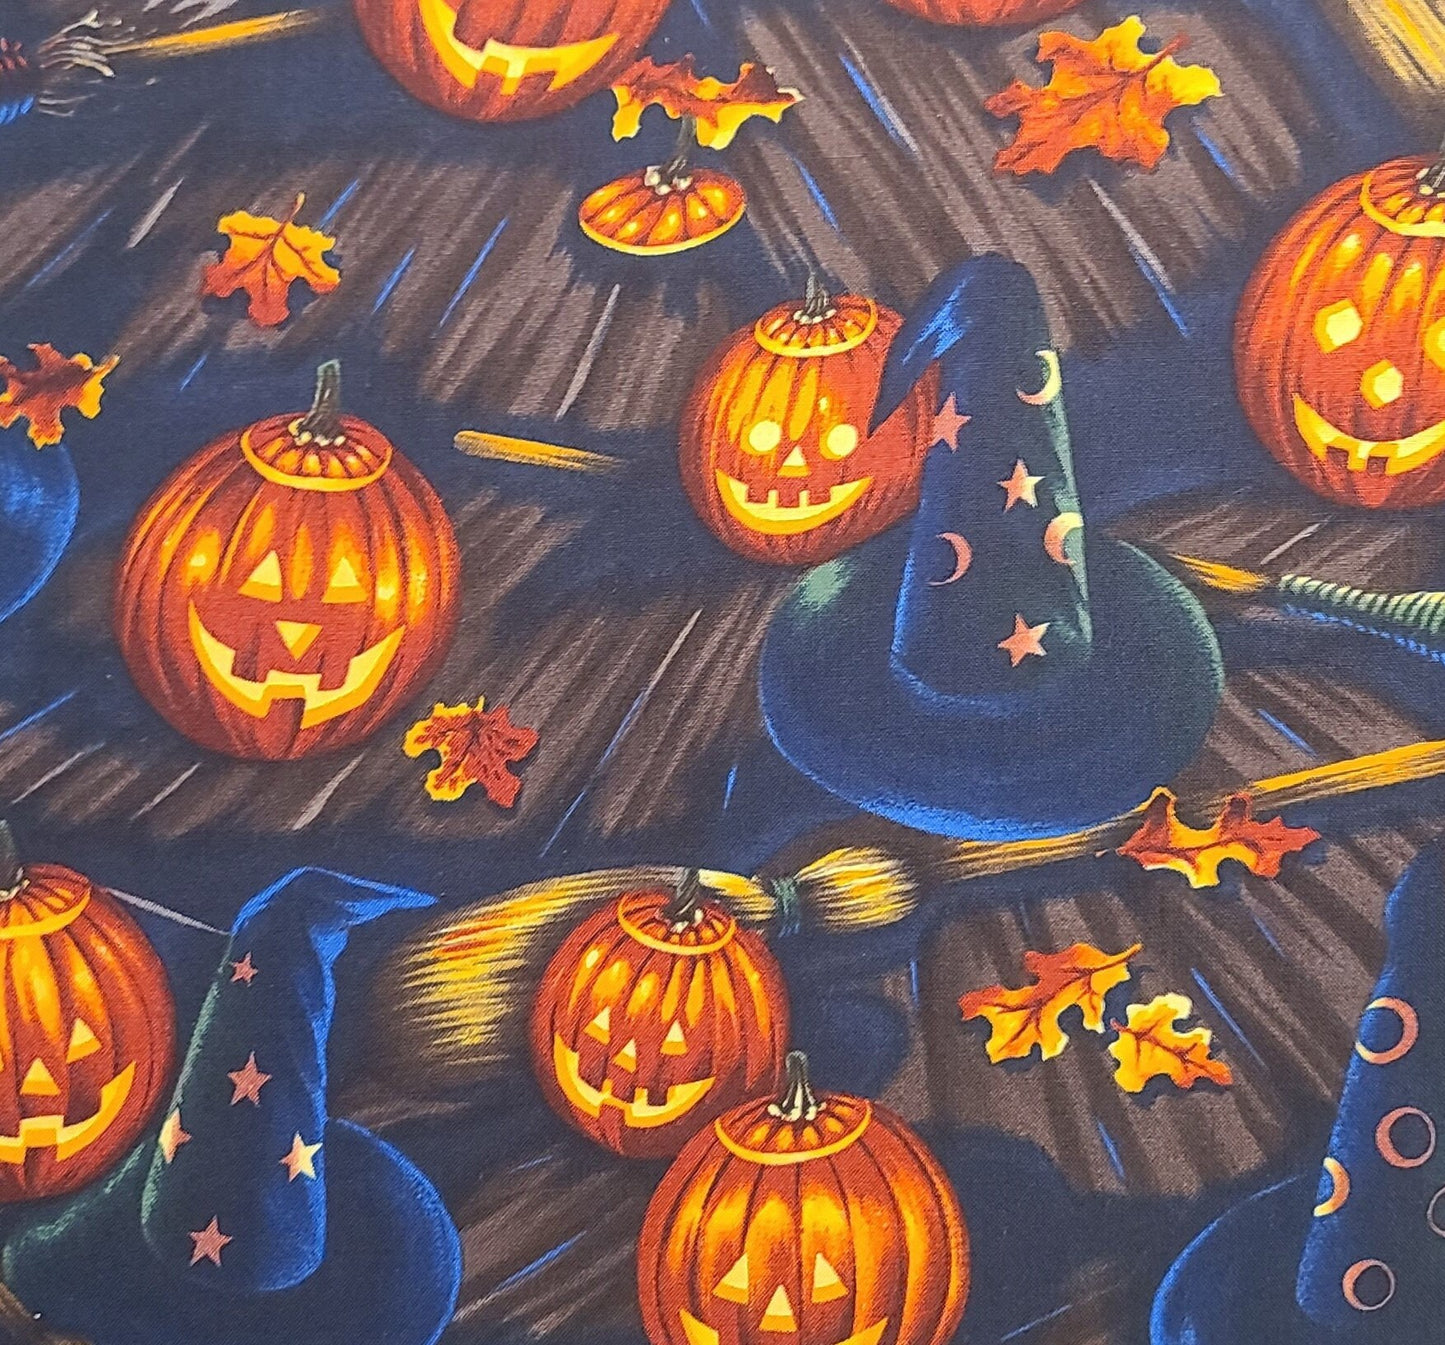 EOB - Bell Knobs & Broomsticks The Alexander Henry Fabric Collection 1998 - Jack-O-Lantern, Broom, Witch Hat Print Fabric